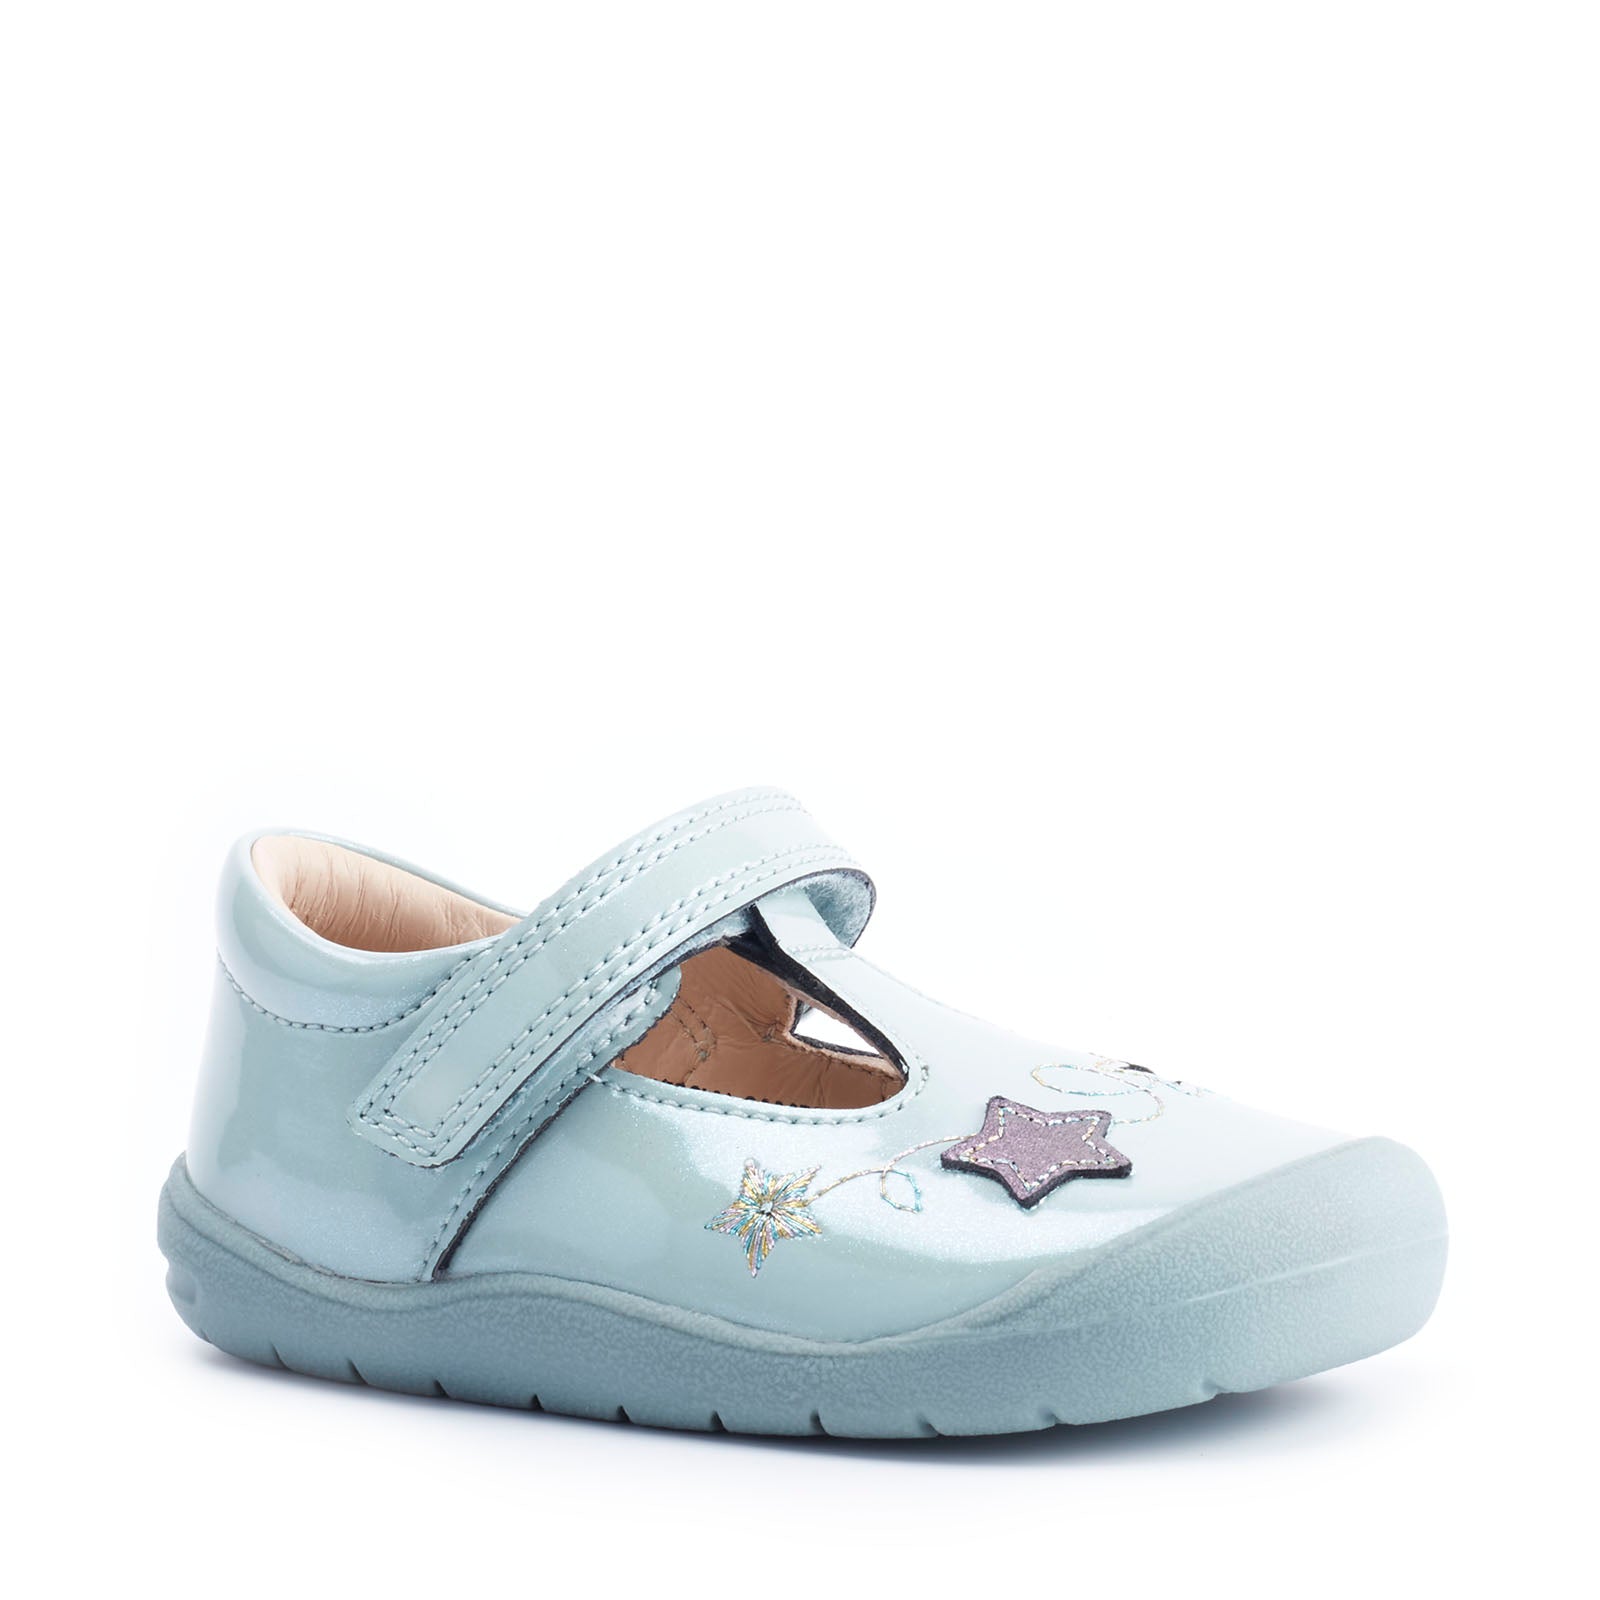 Start-Rite Sparkle 0772 - Dusty Sage leather girls Velcro first walking shoes Start-Rite Shoes | Personal Shoe Fitting Service | Wisemans | Bantry | West Cork | Munster | Ireland